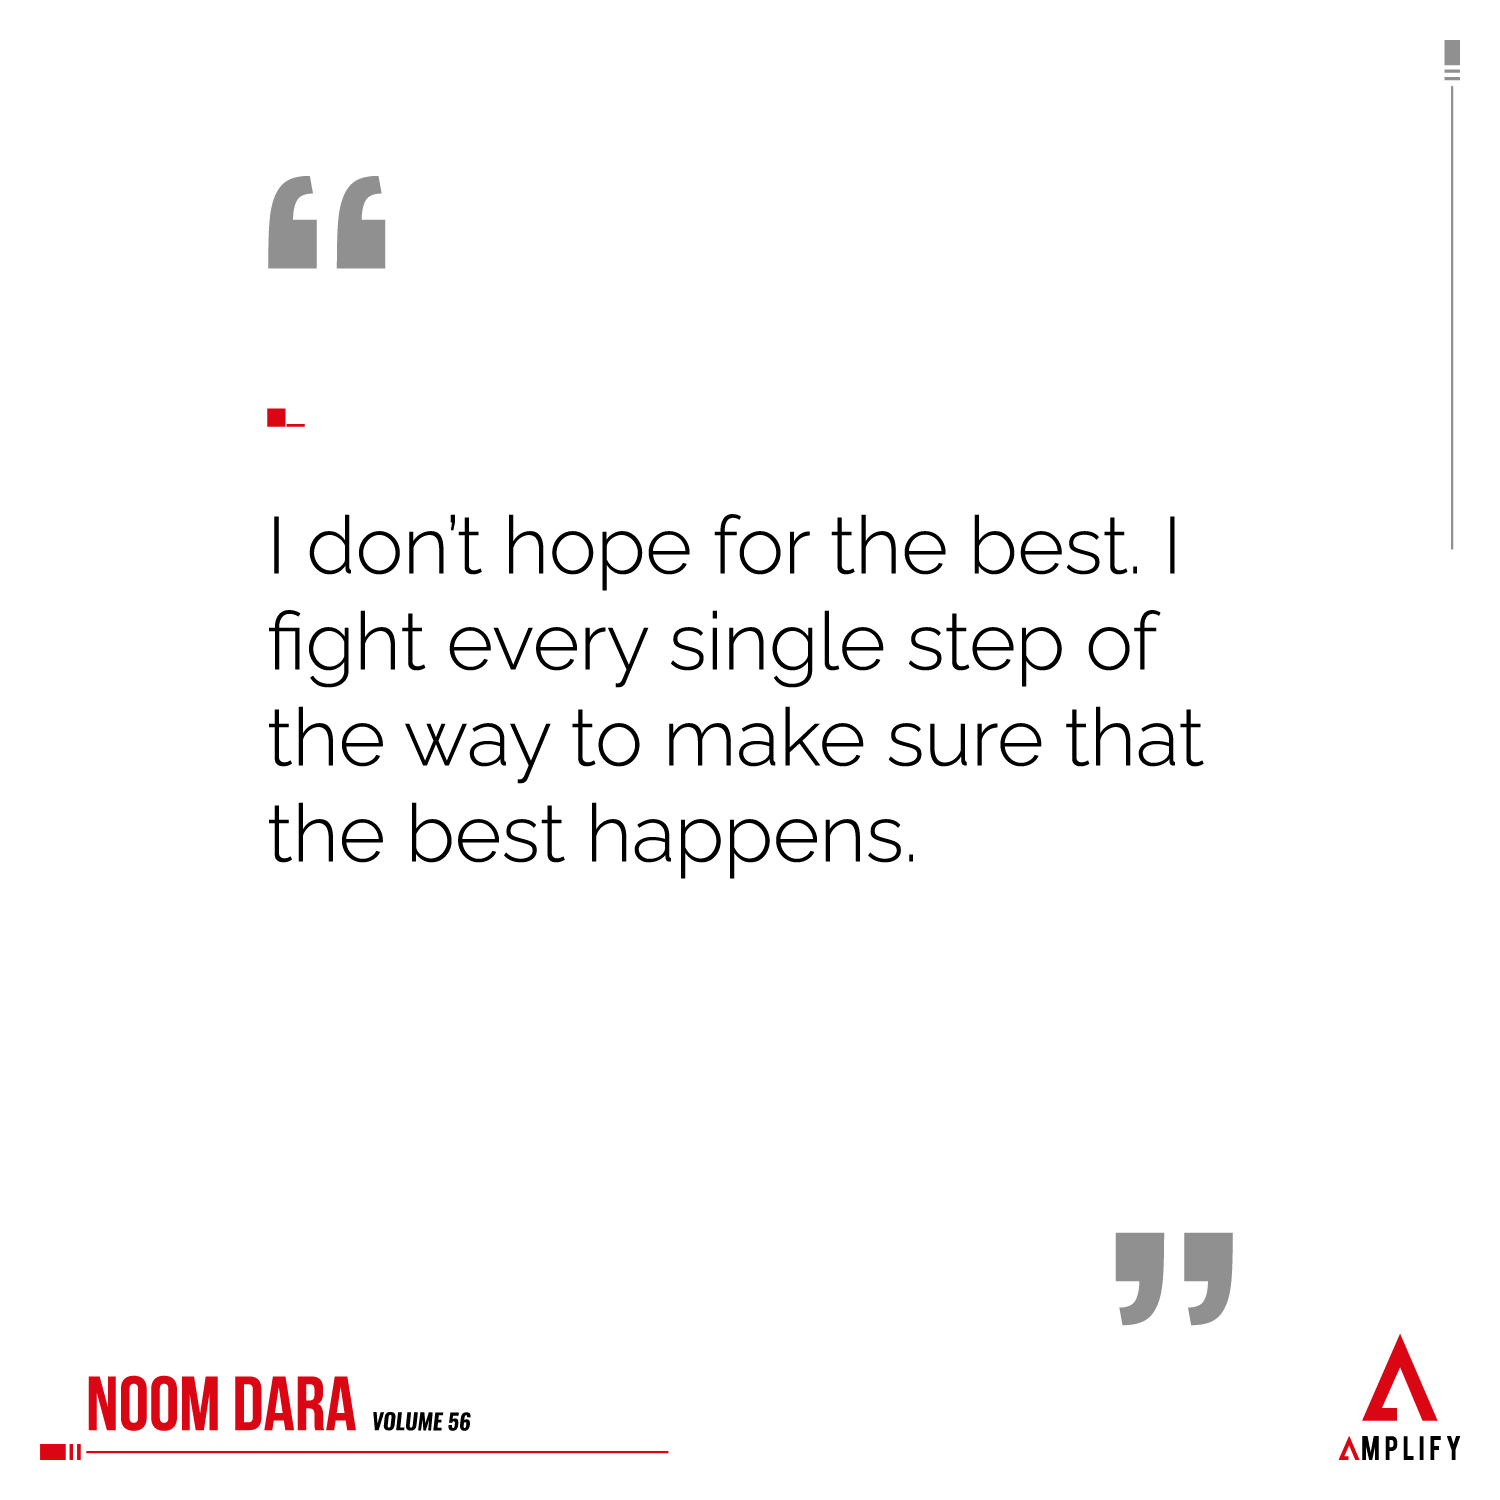 Quote: I don’t hope for the best. I fight every single step of the way to make sure that the best happens.